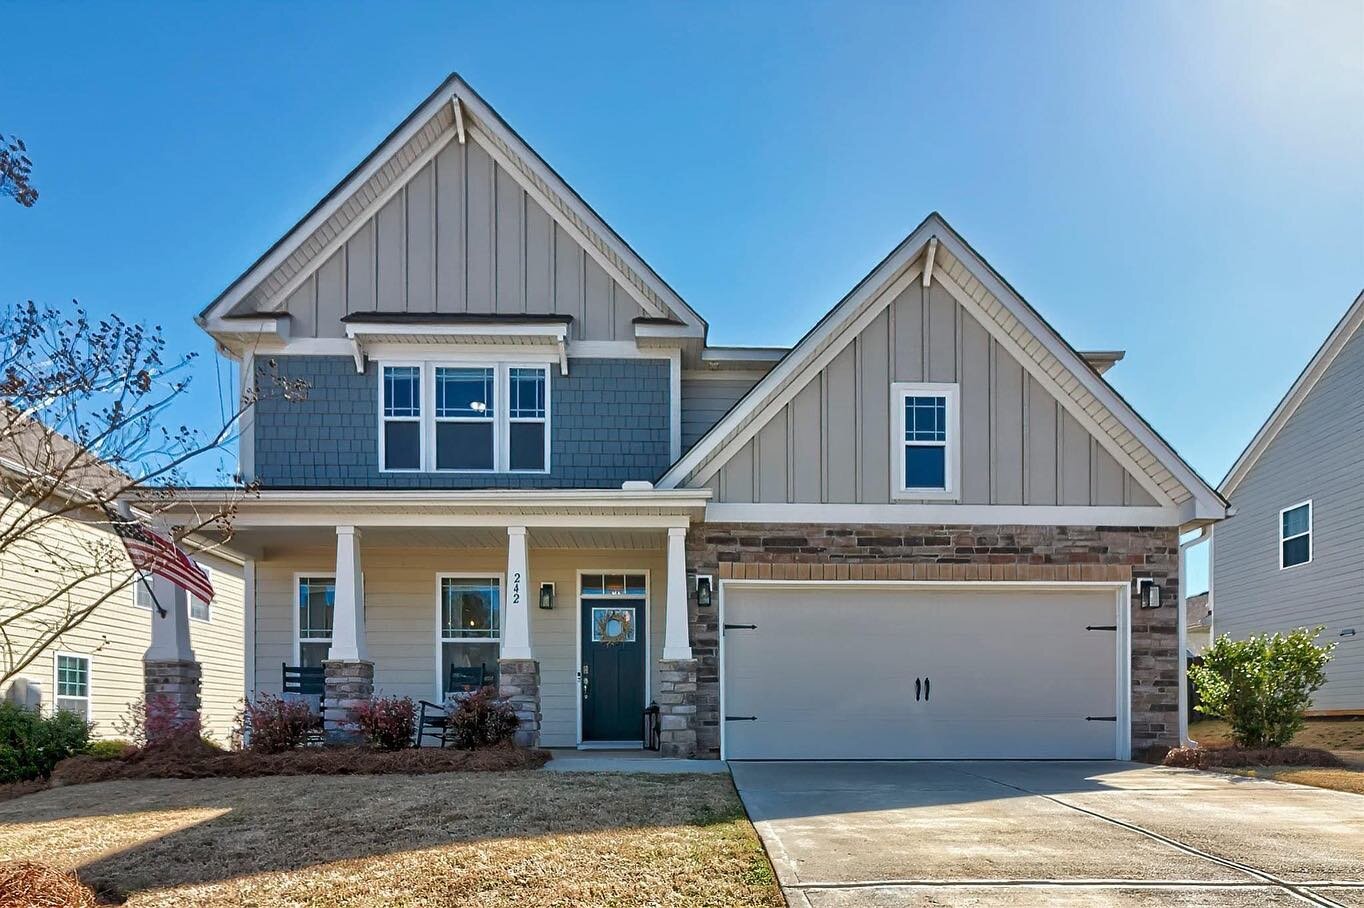 Amazing new listing! 4 beds / 3 baths 3123 SF | $480,000
.
Offering a prime Lexington, SC location convenient to shopping, dining, schools, and I-20, this neighborhood is in the center of everything. Zoned for sought after schools Midway Elementary, 